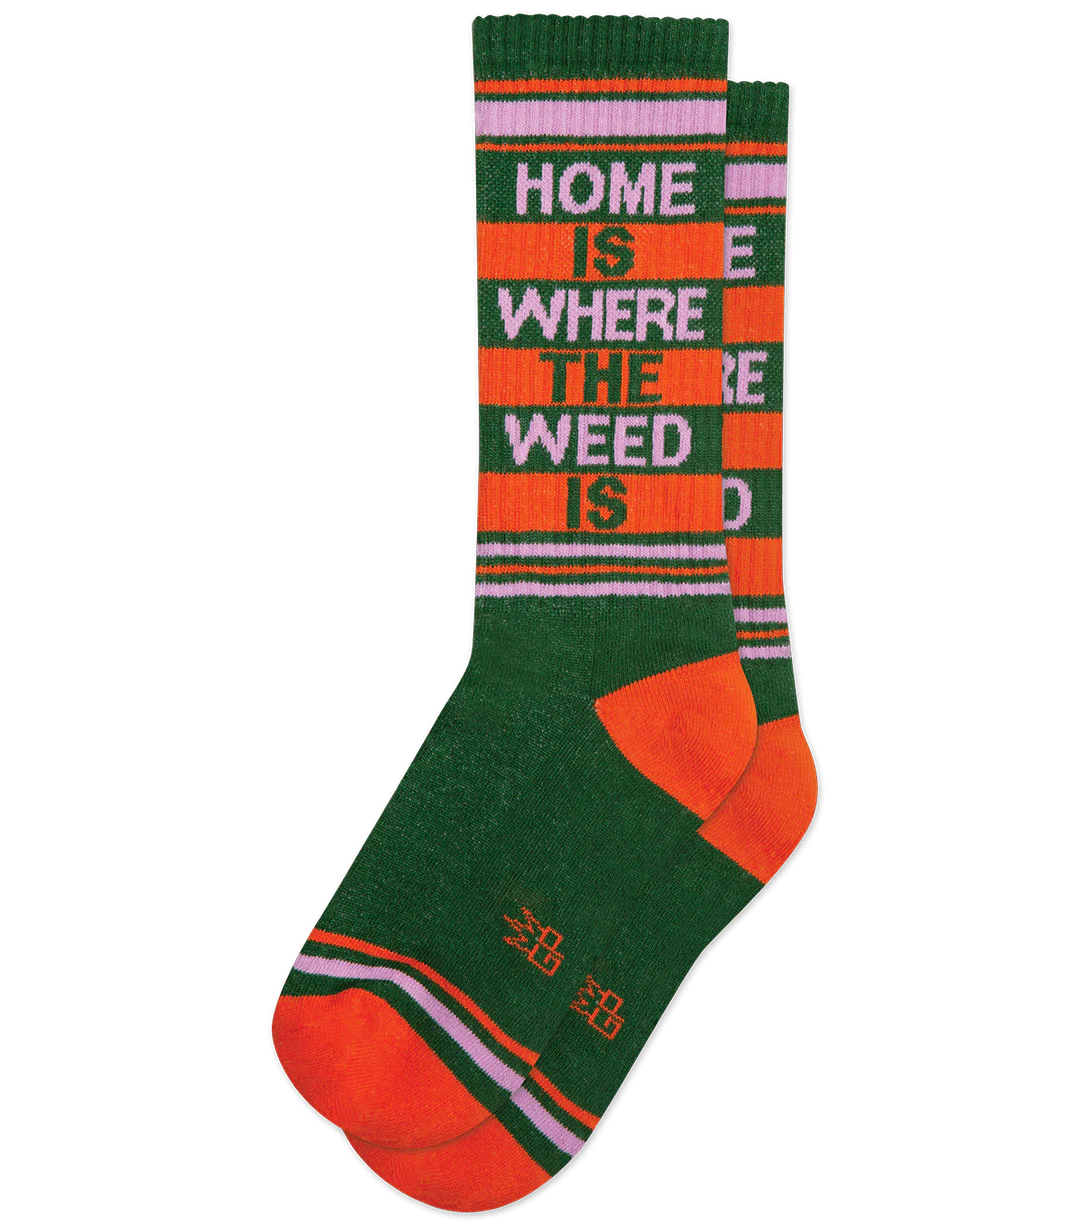 Gumball Poodle Socks: Home is Where the Weed is